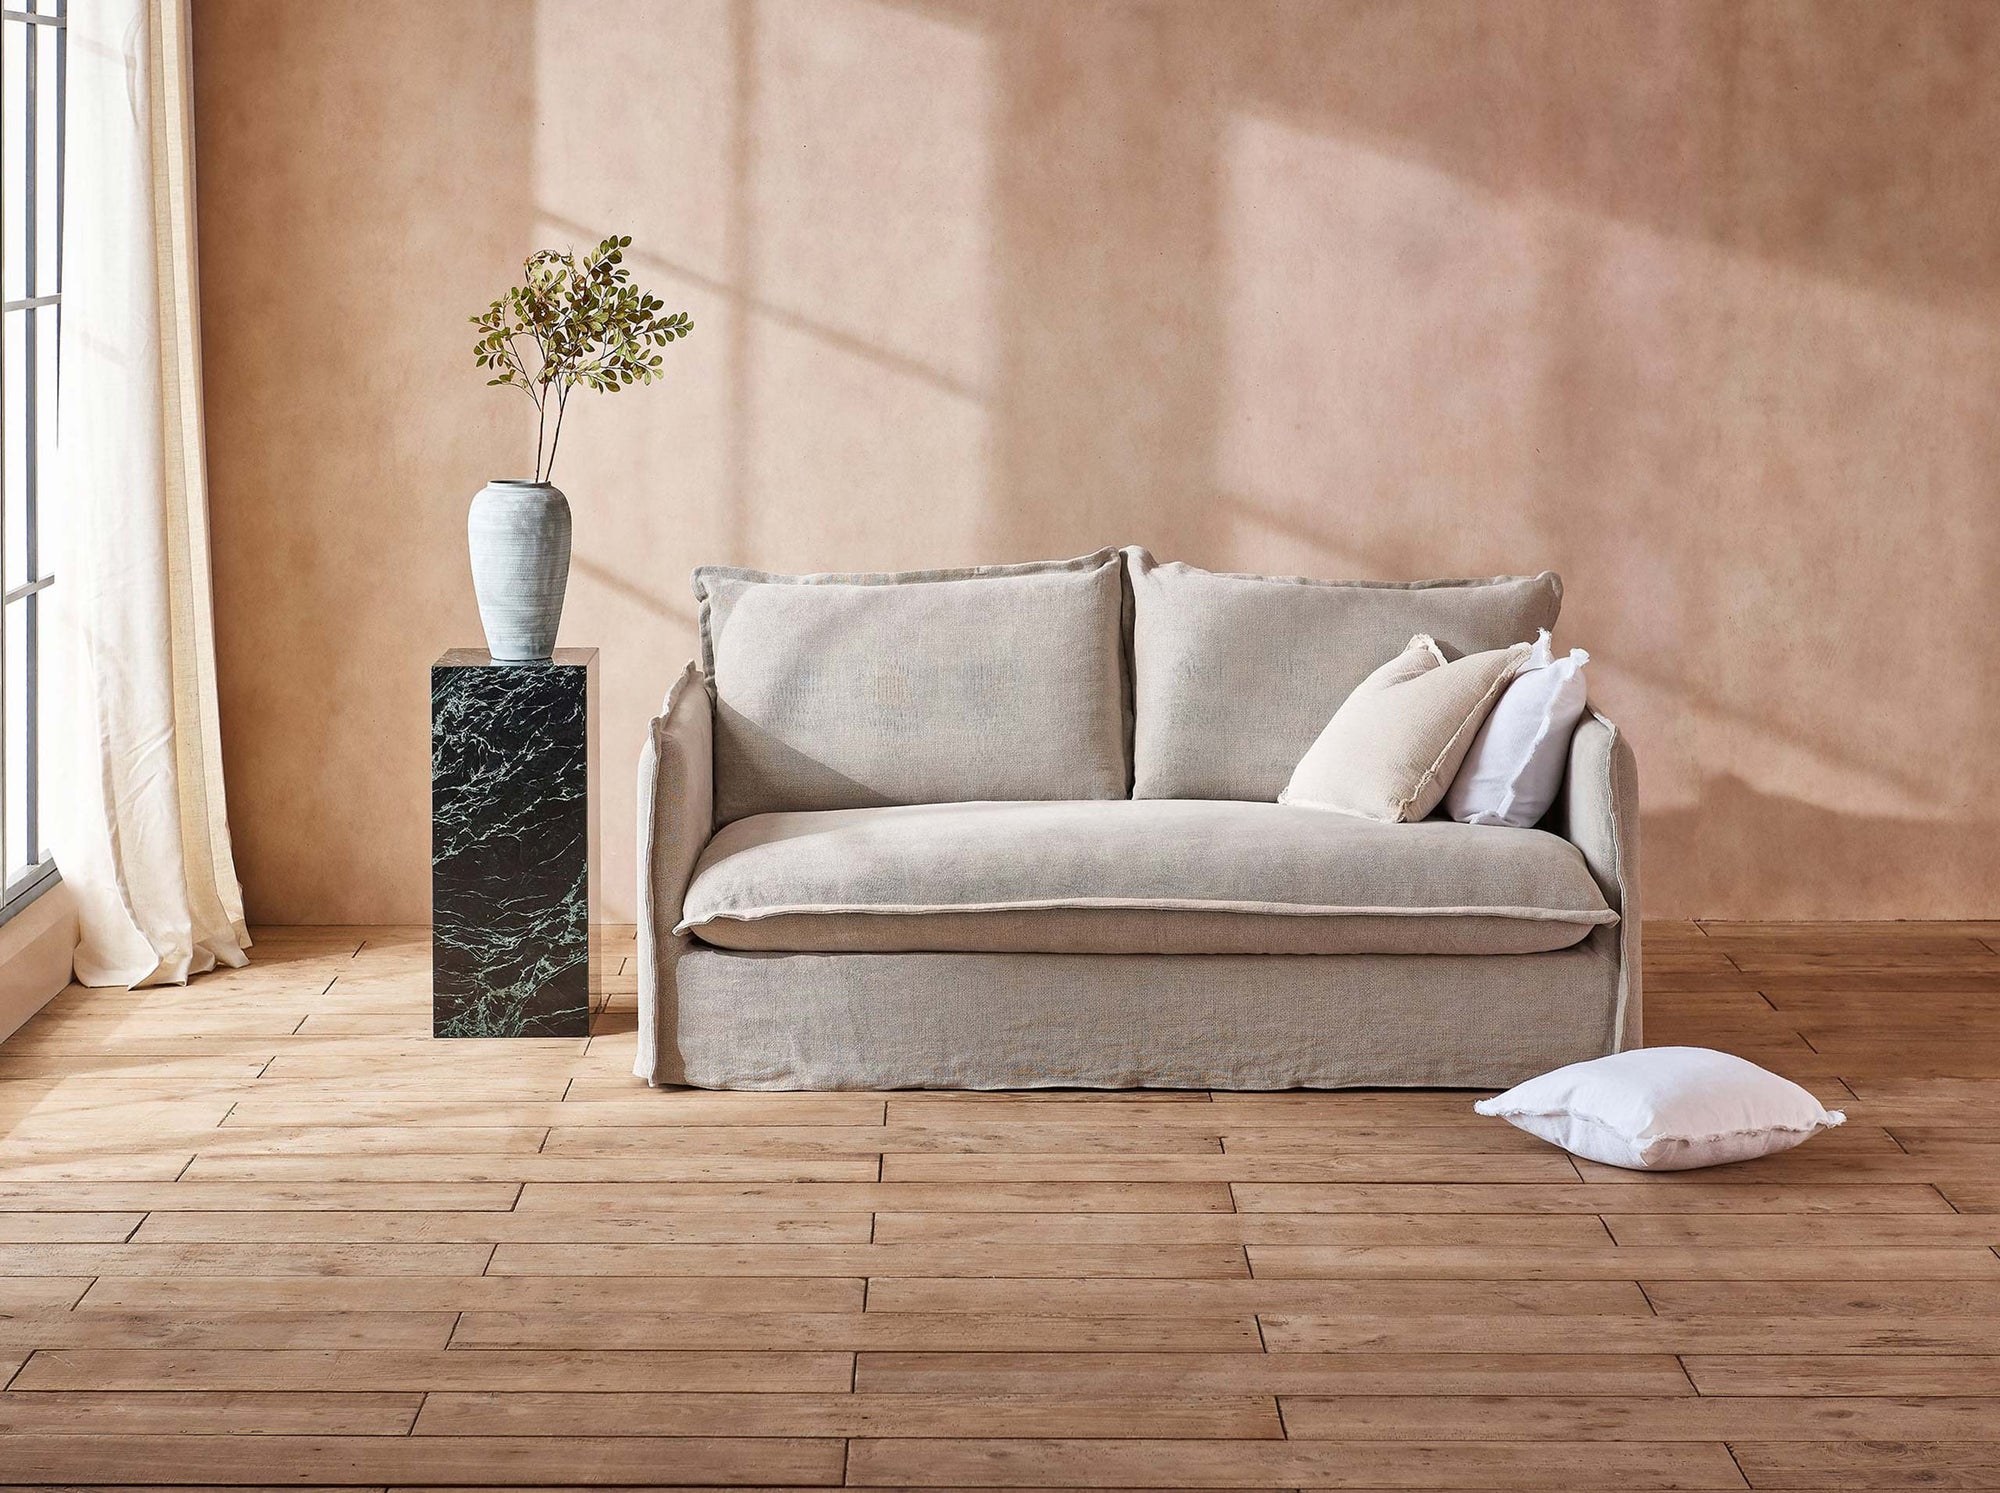 Neva 72" Sofa in Jasmine Rice, a light warm greige Medium Weight Linen, placed in a sunlit room next to plants in a vase on a side table